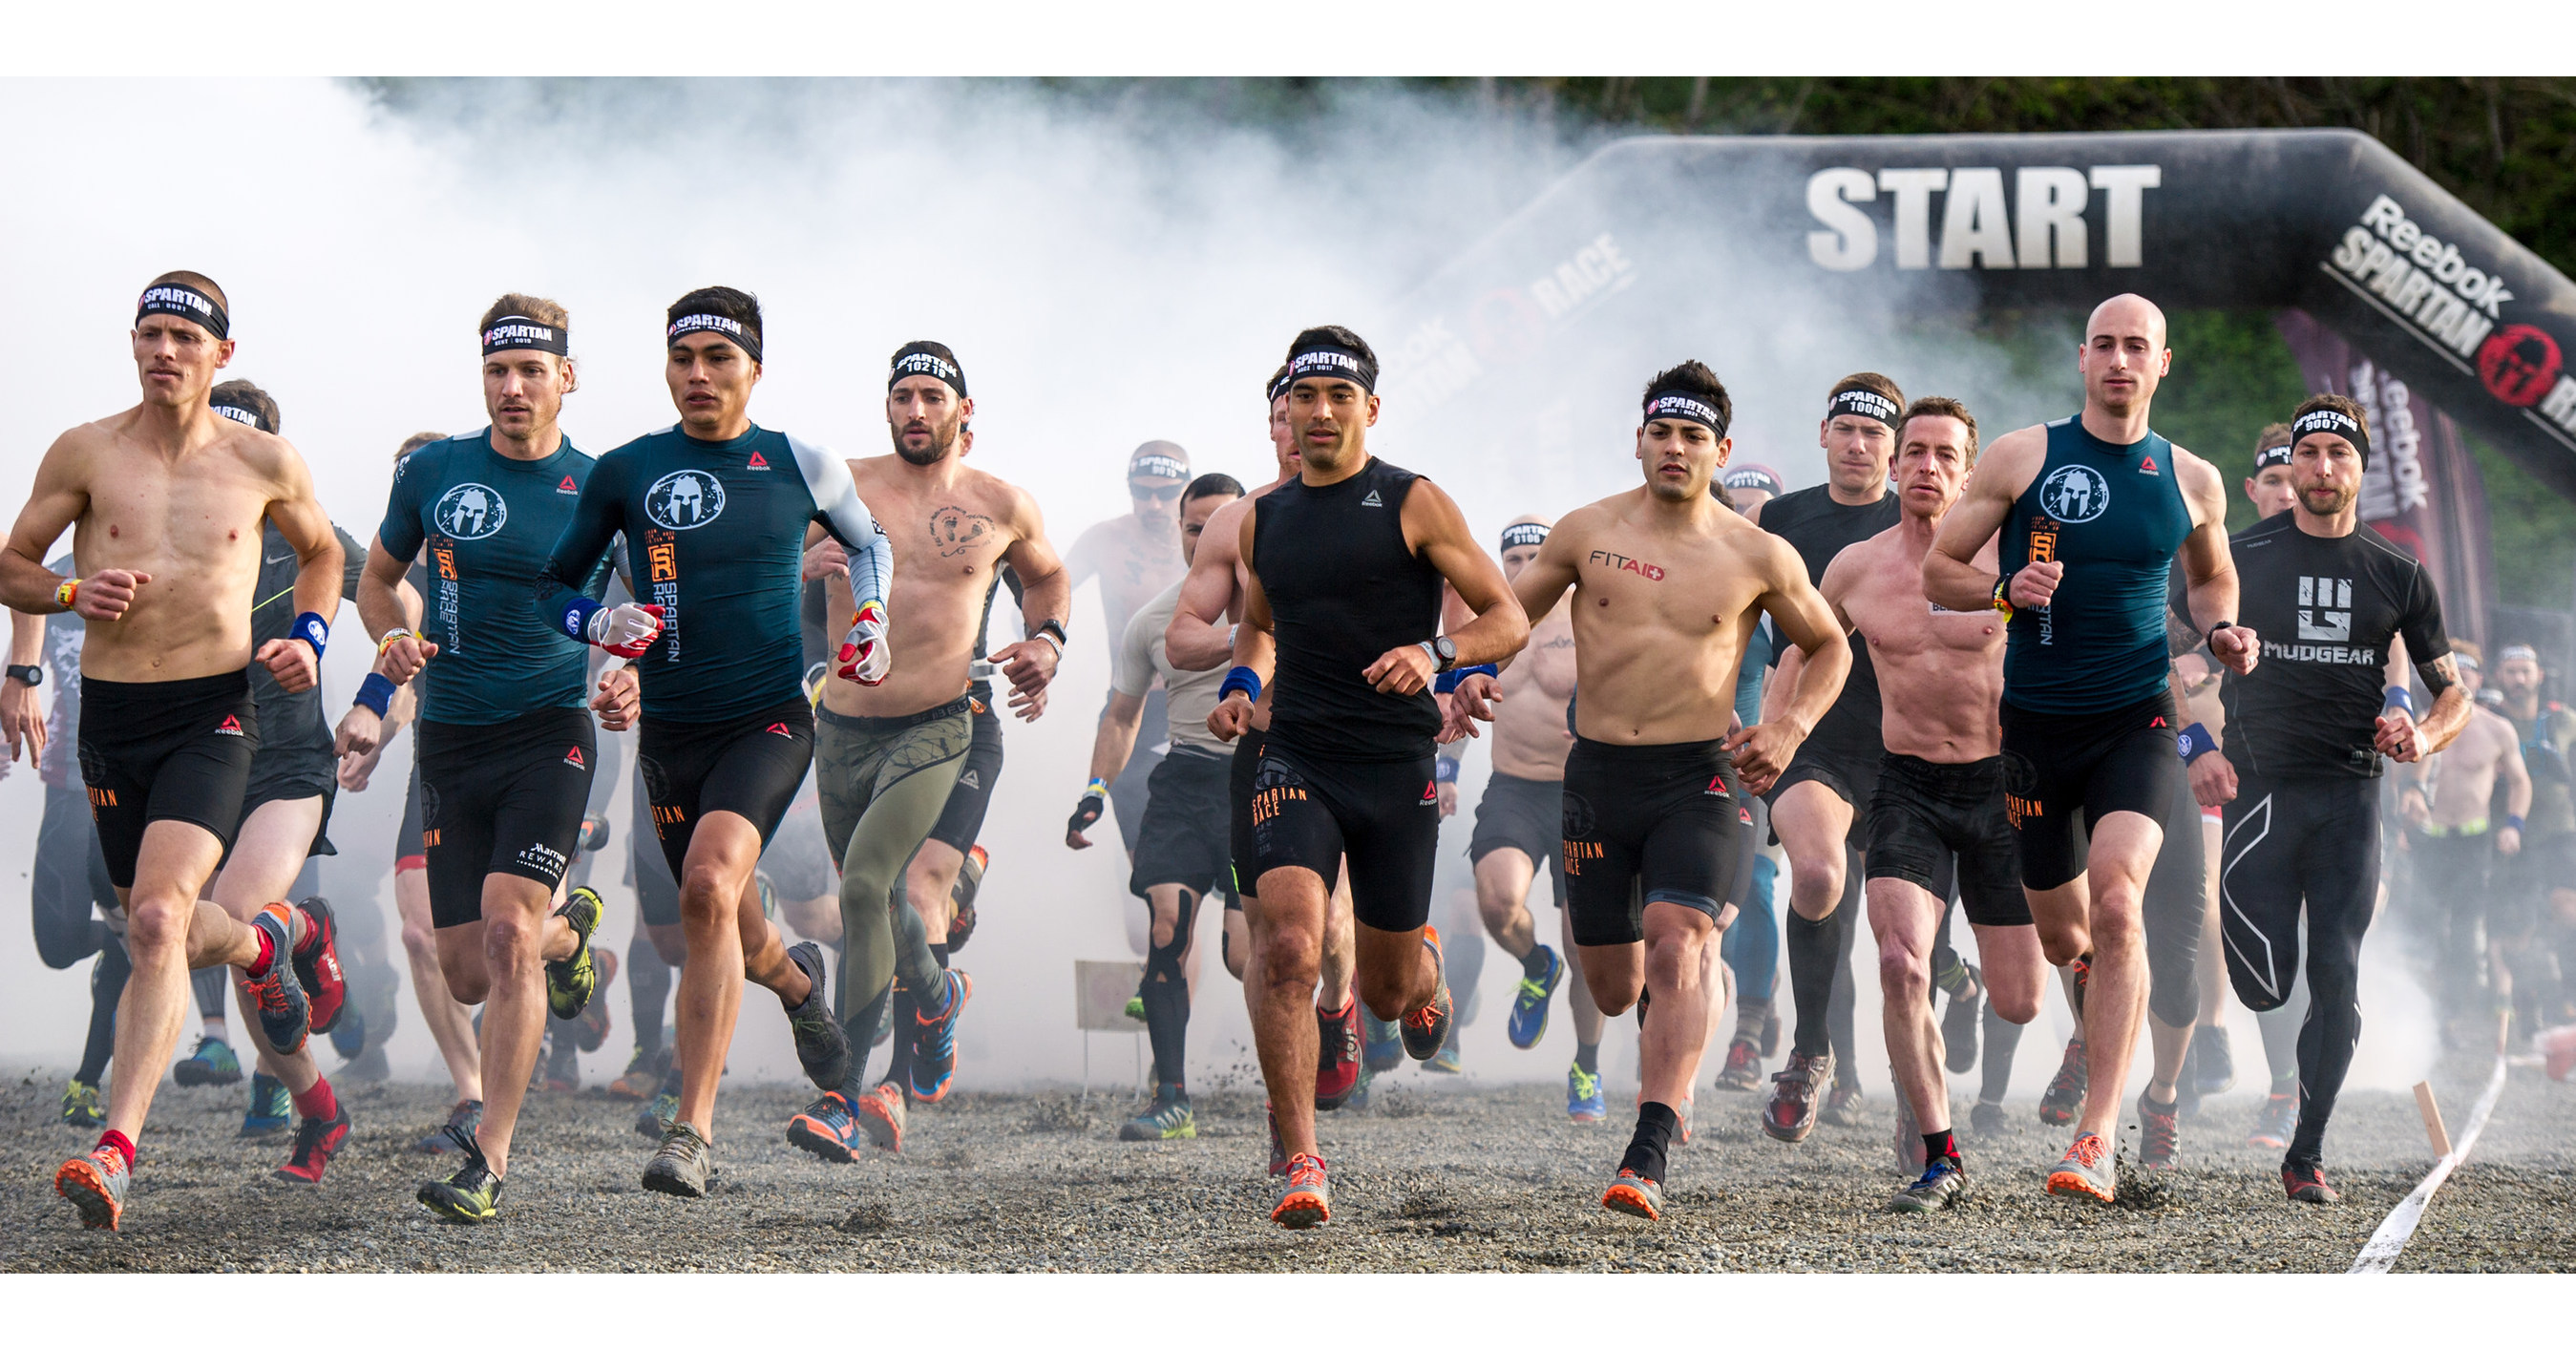 Analytisk tone I udlandet Spartan, the World's Largest Obstacle Race and Endurance Brand, to Bring  Live Content to Facebook's Watch Platform